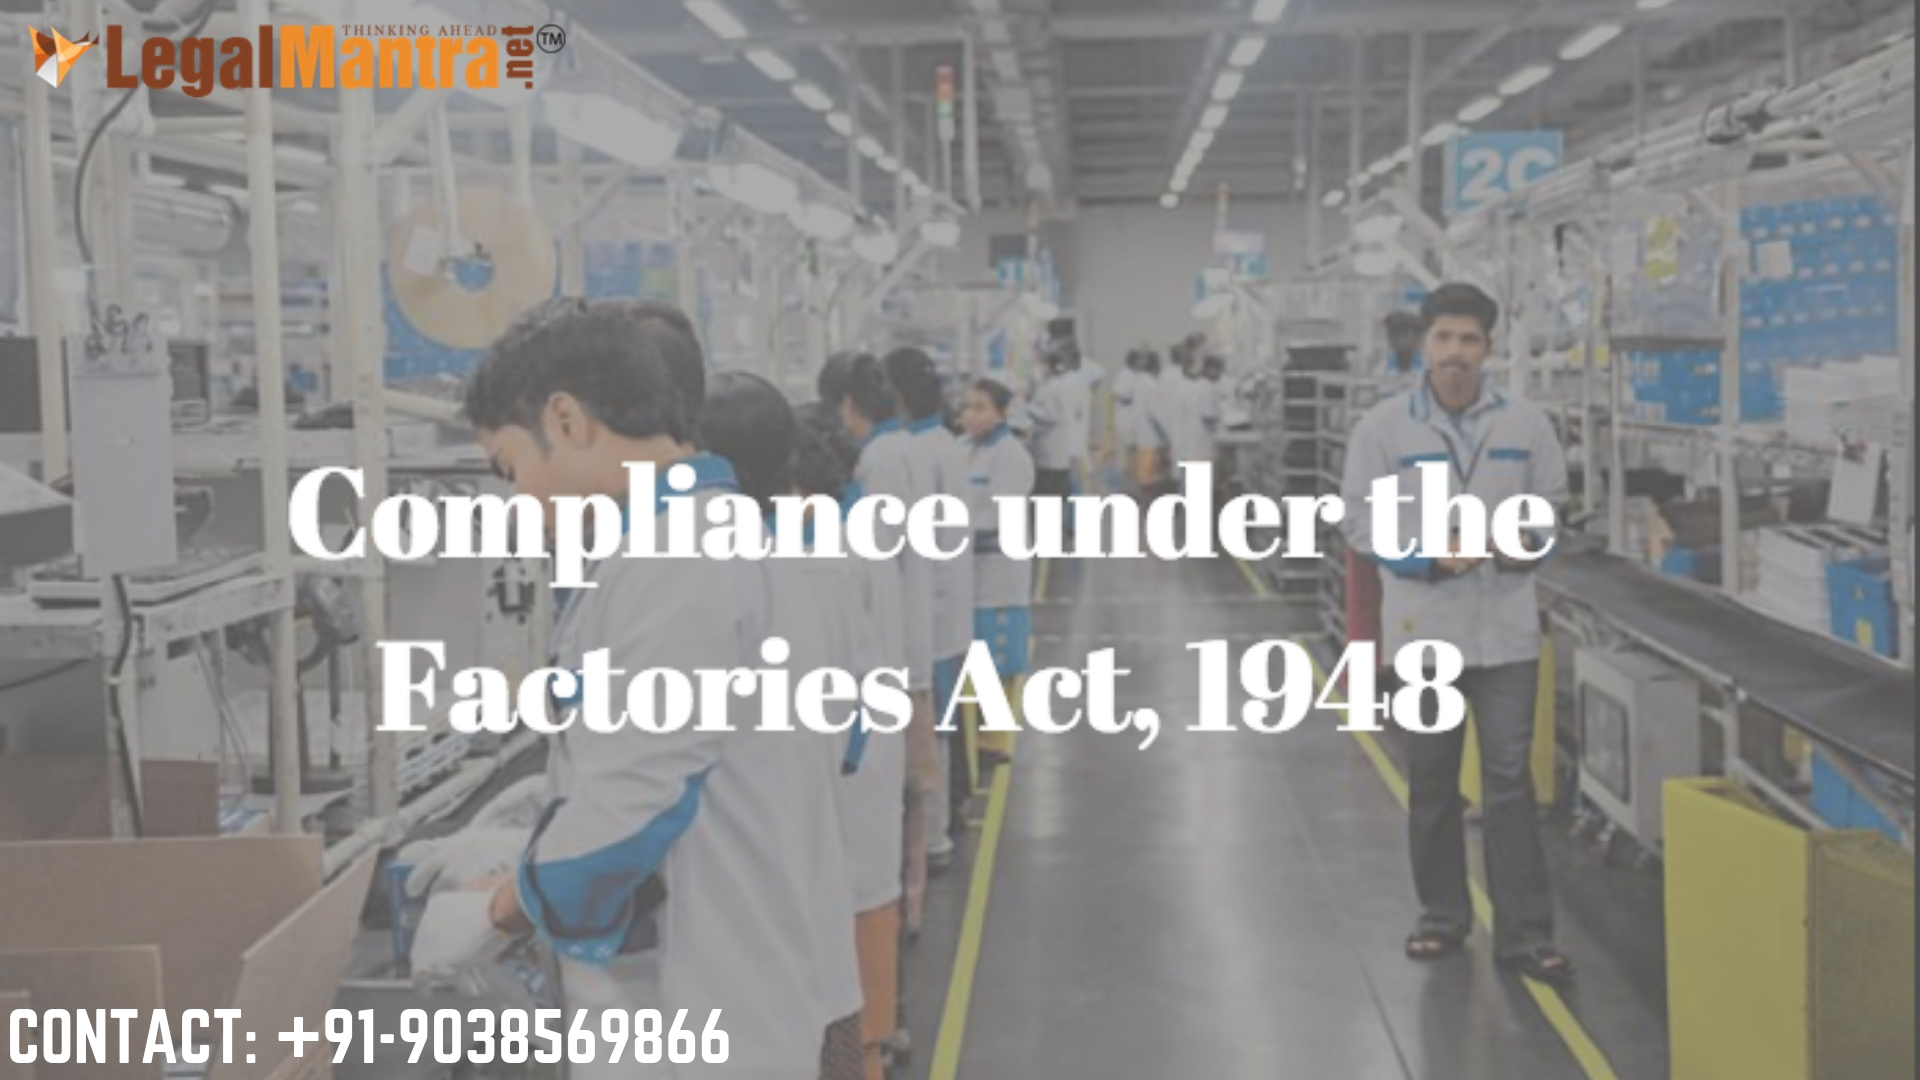 Objective of Factories Act, 1948